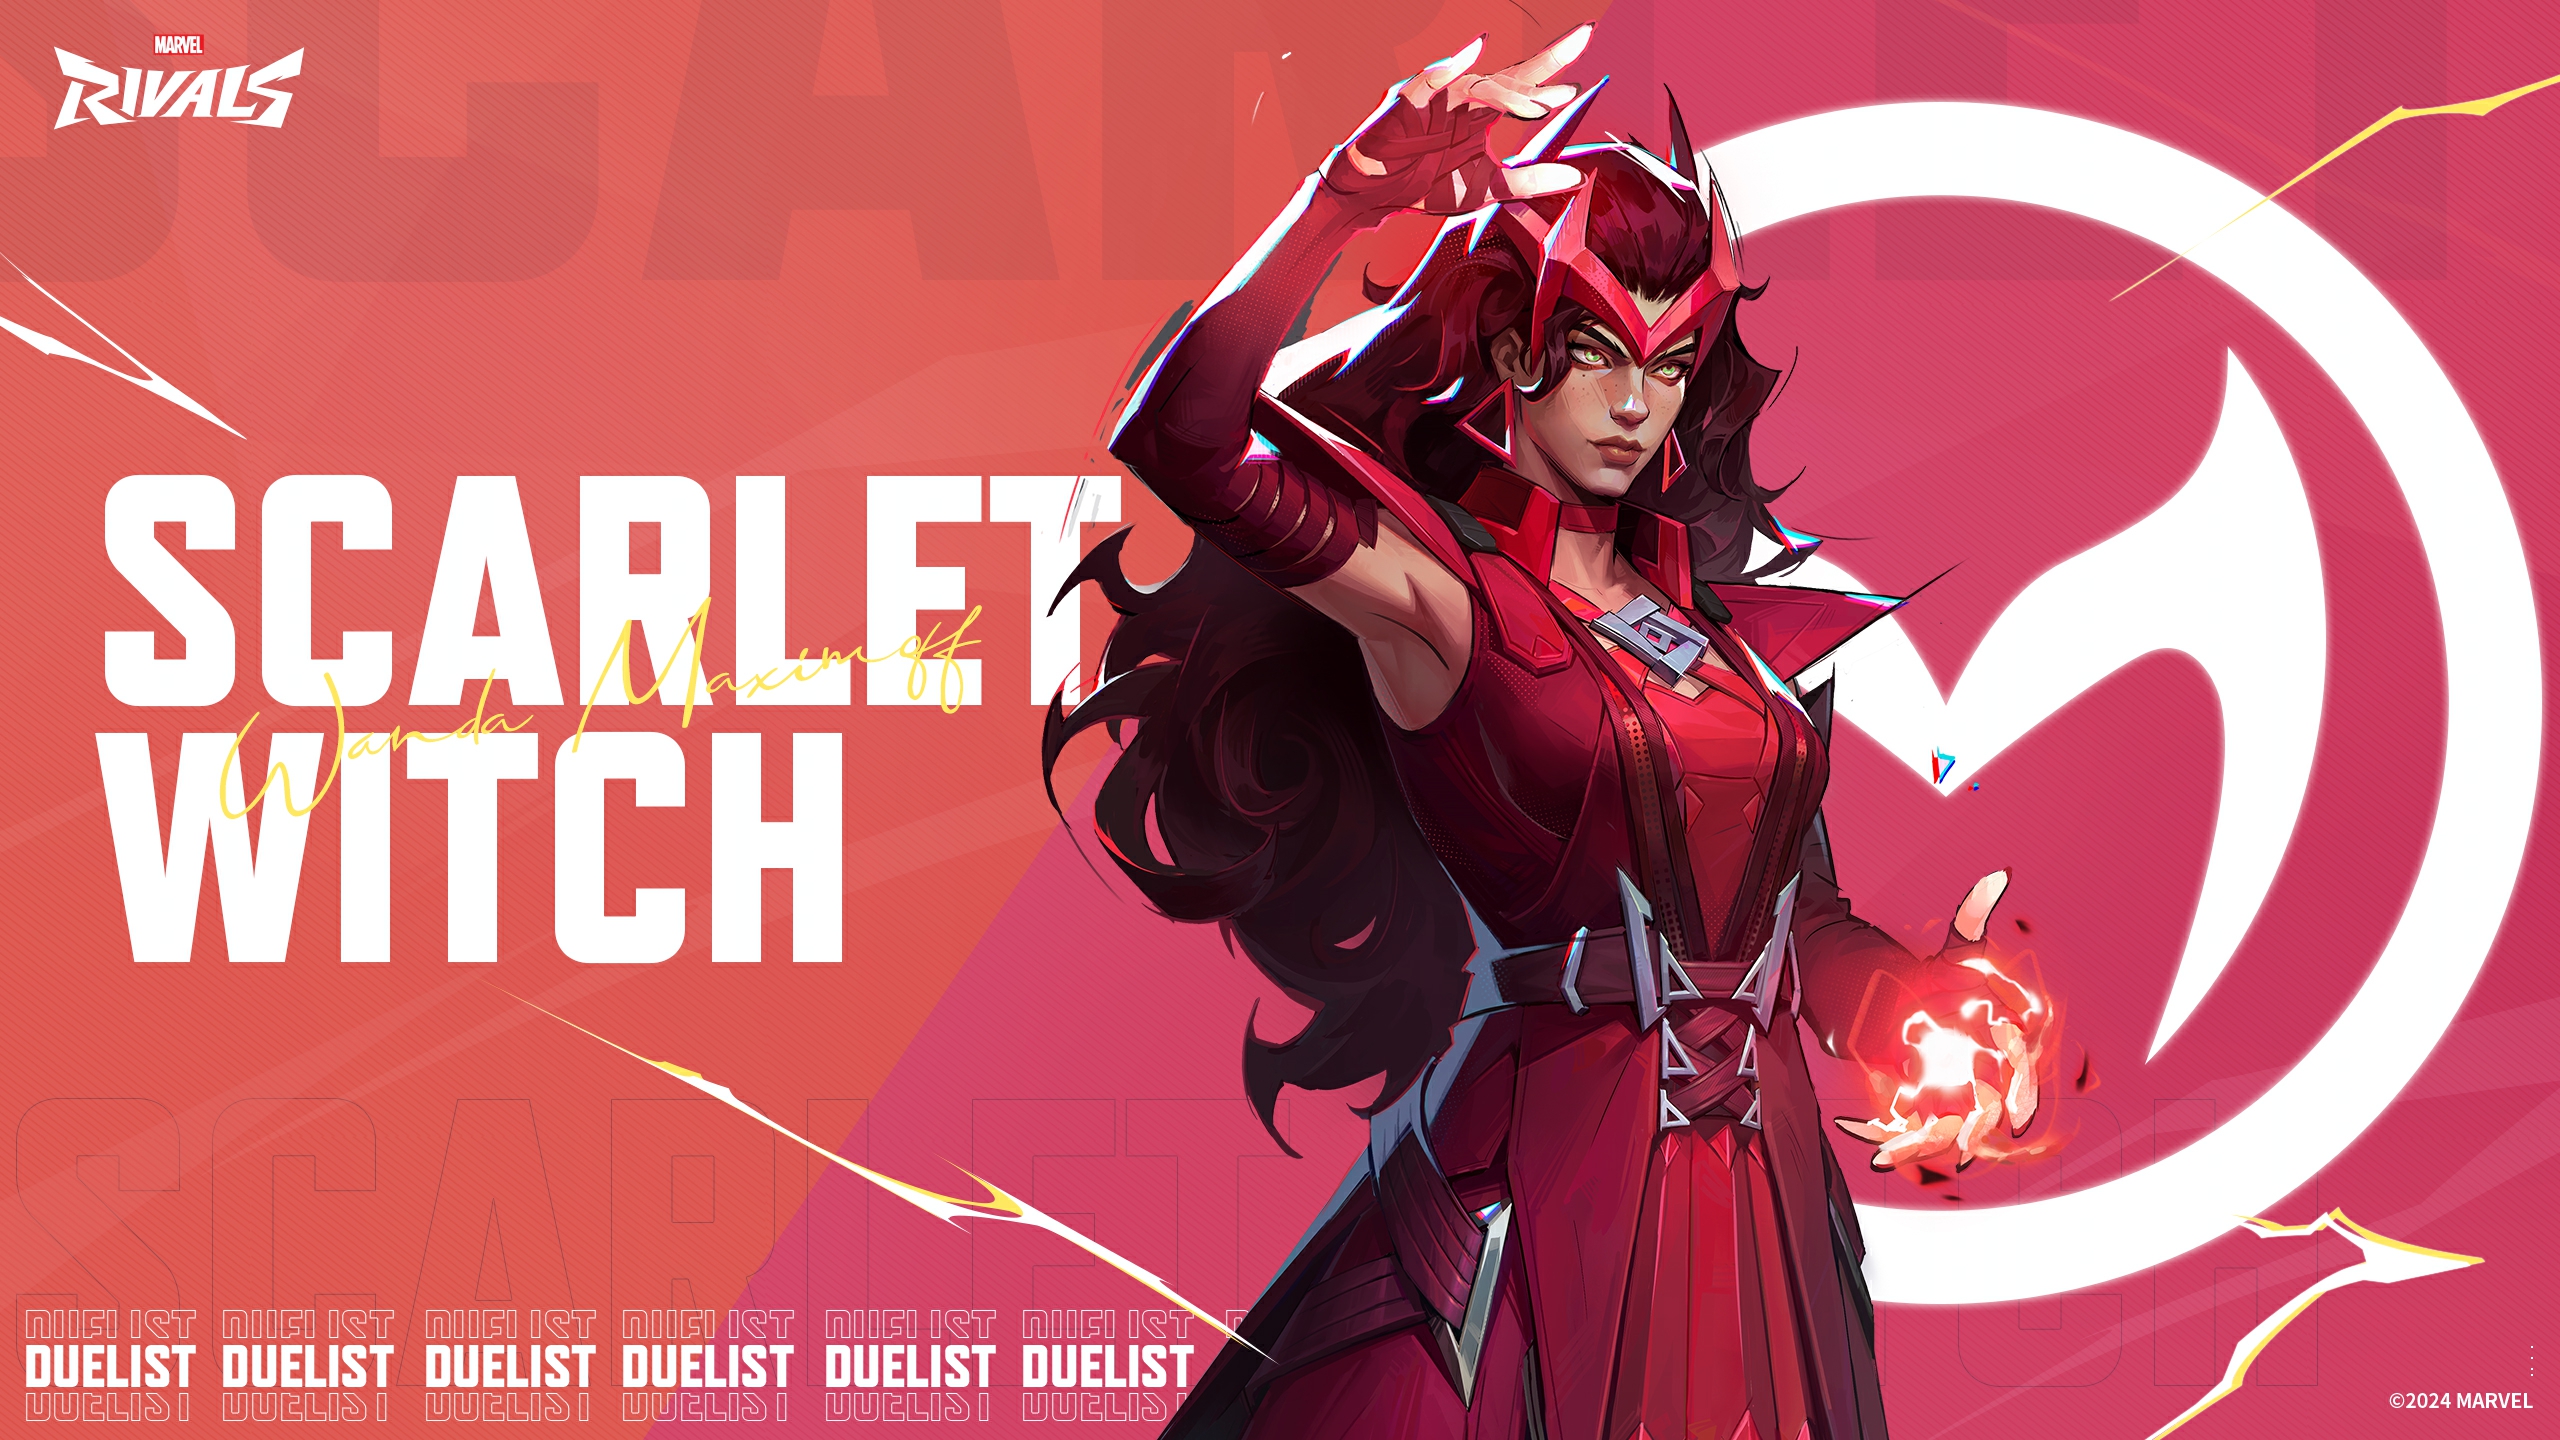 Marvel Rivals Scarlet Witch Text Video Game Characters Comic Character Comic Art Comics 2560x1440